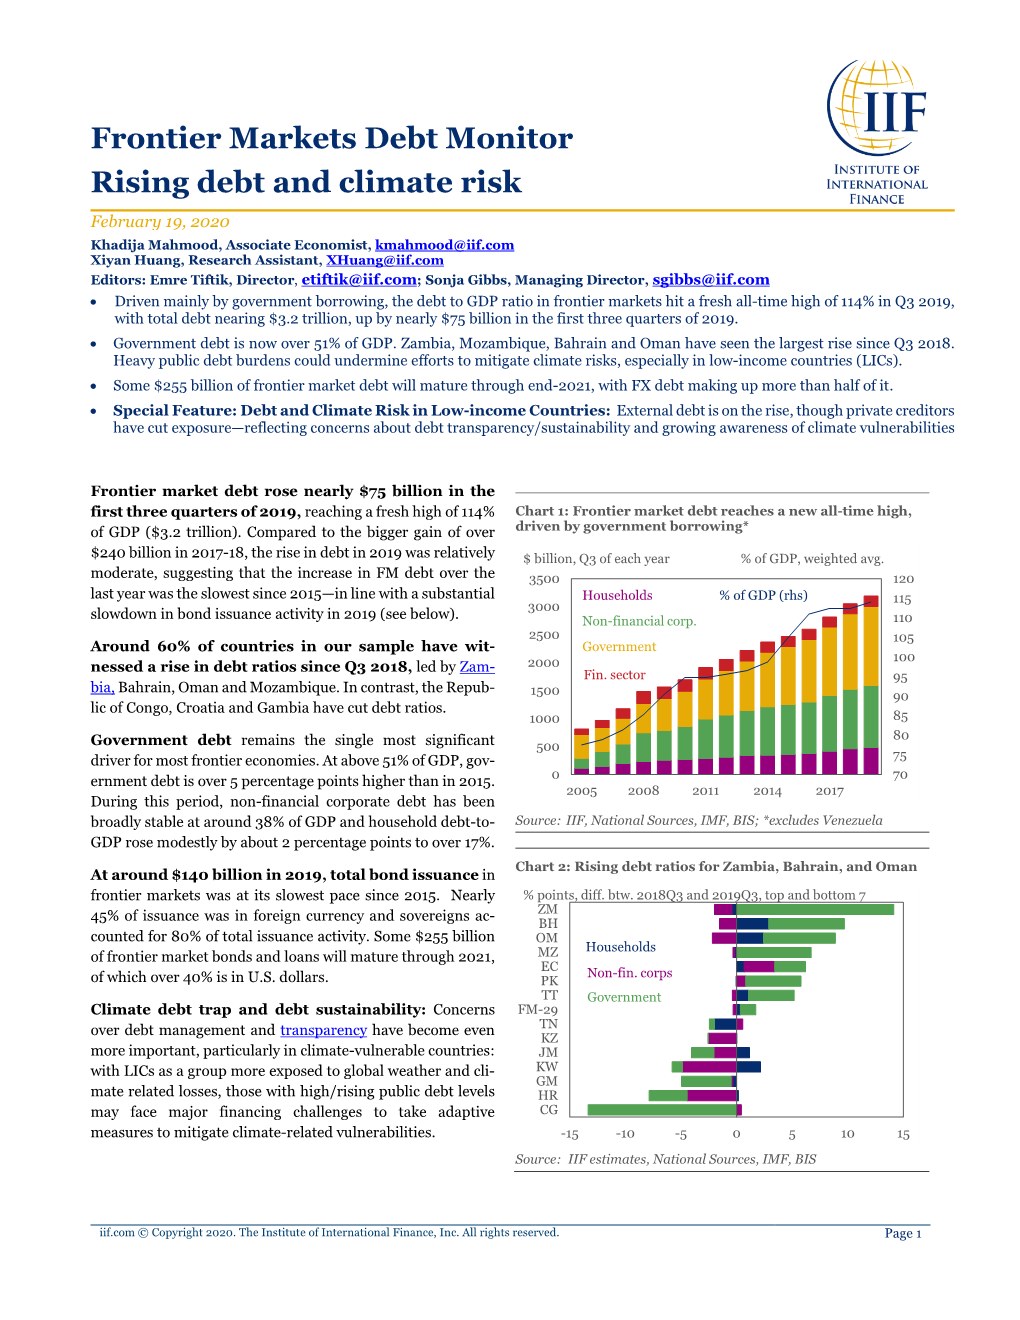 Frontier Markets Debt Monitor Rising Debt and Climate Risk